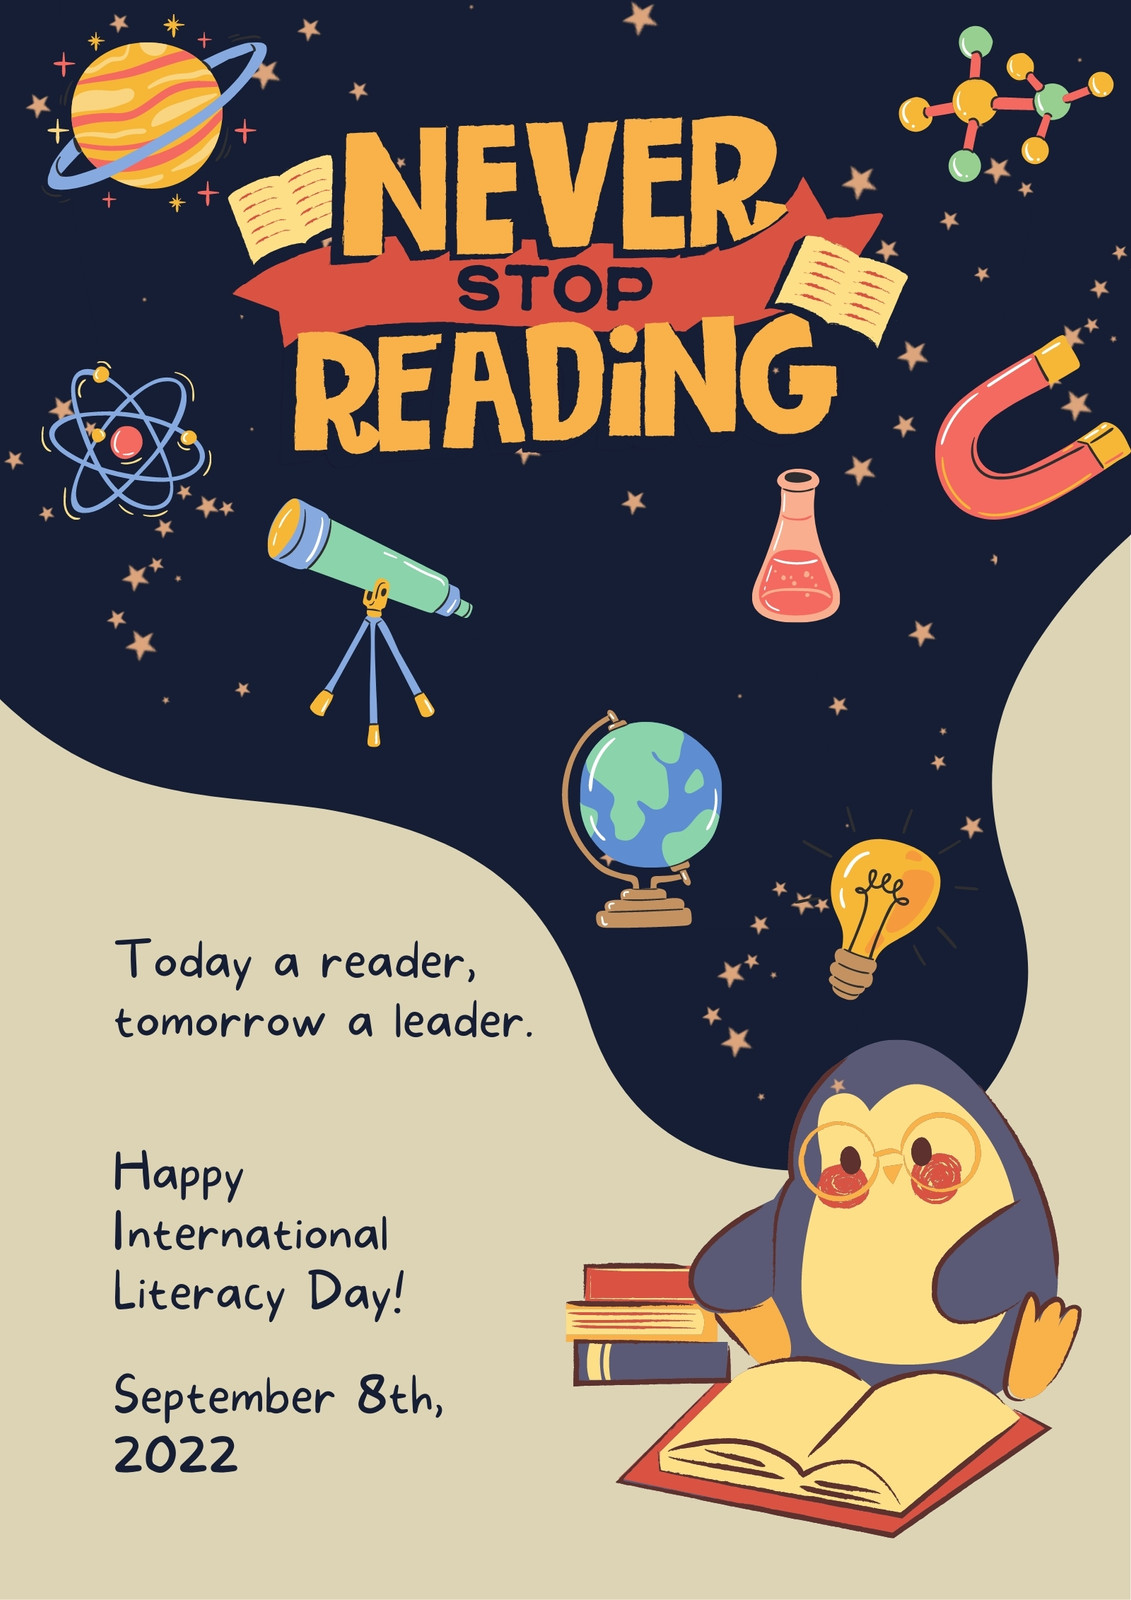 Free customizable printable reading poster templates | Canva